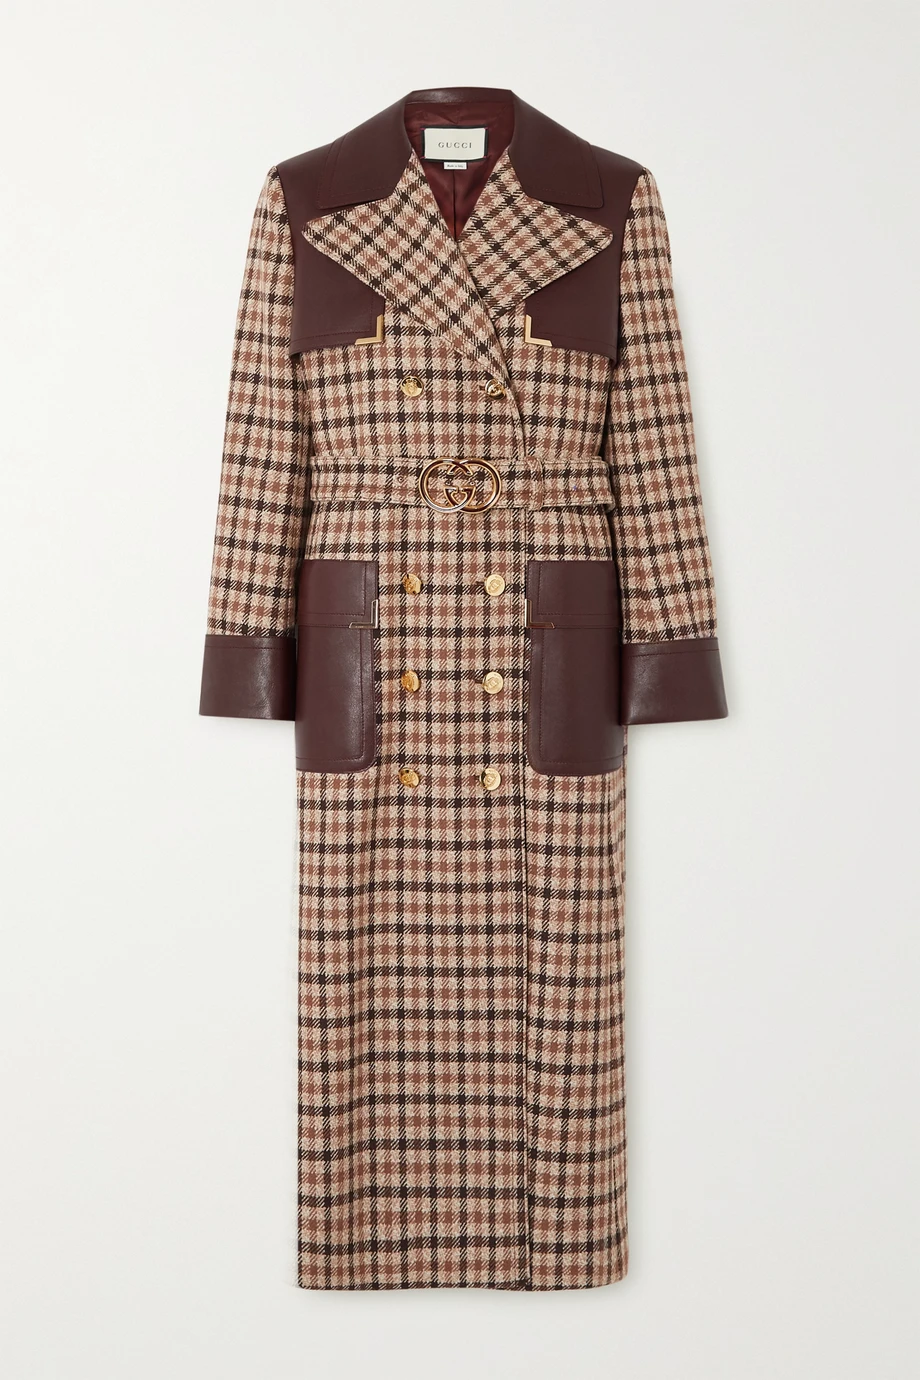 Gucci belted wool blended checkered coat